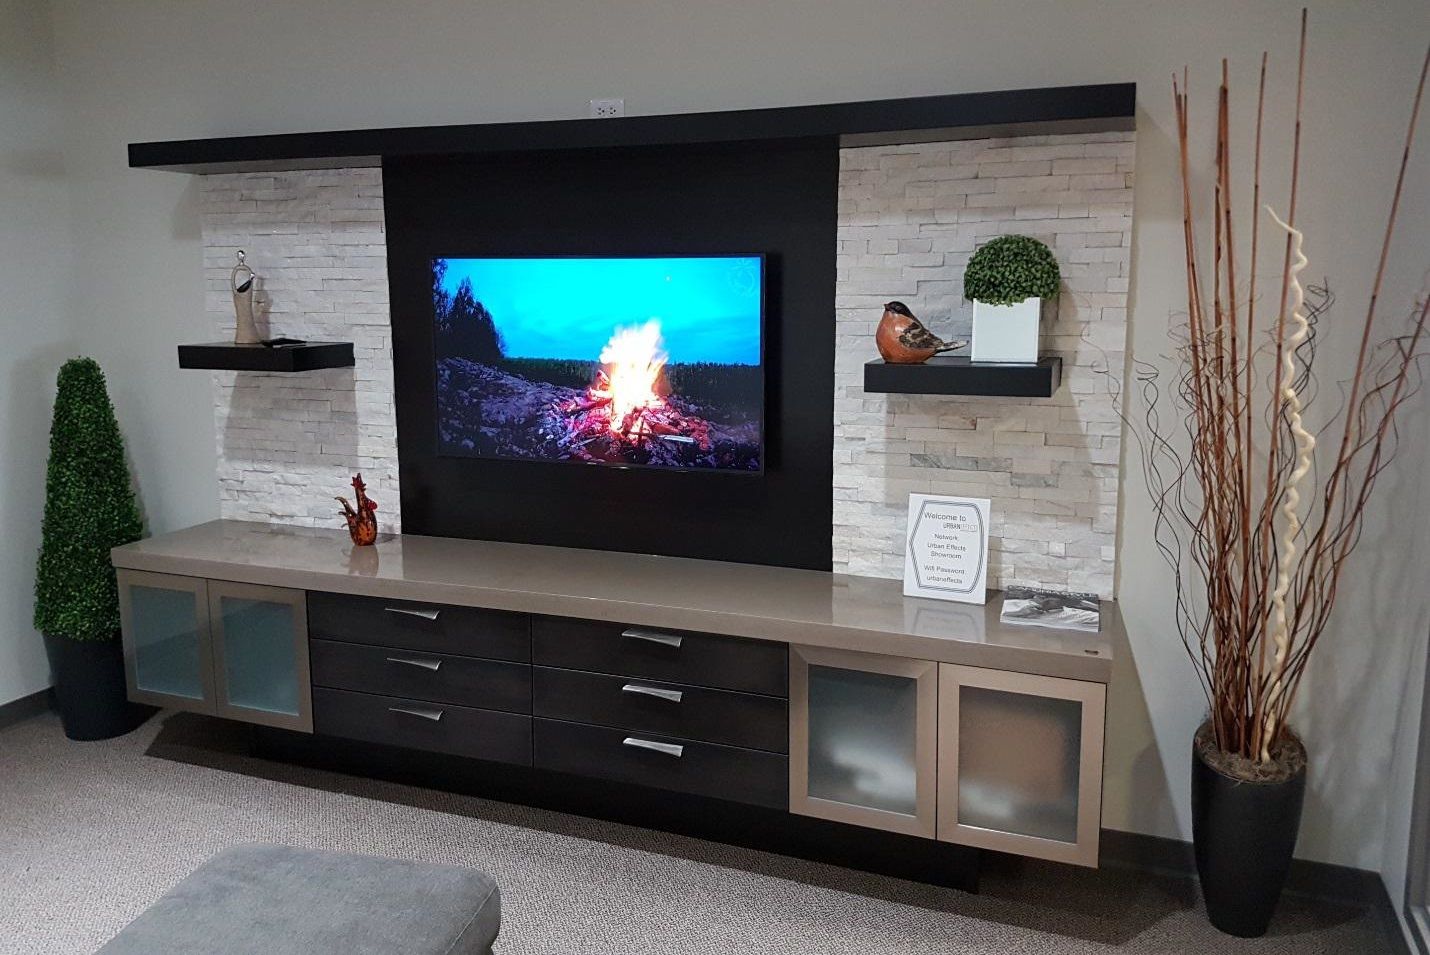 Make Your Home A Theater With Custom Built Entertainment Centers Regarding Rgb Tv Entertainment Centers (Gallery 16 of 20)